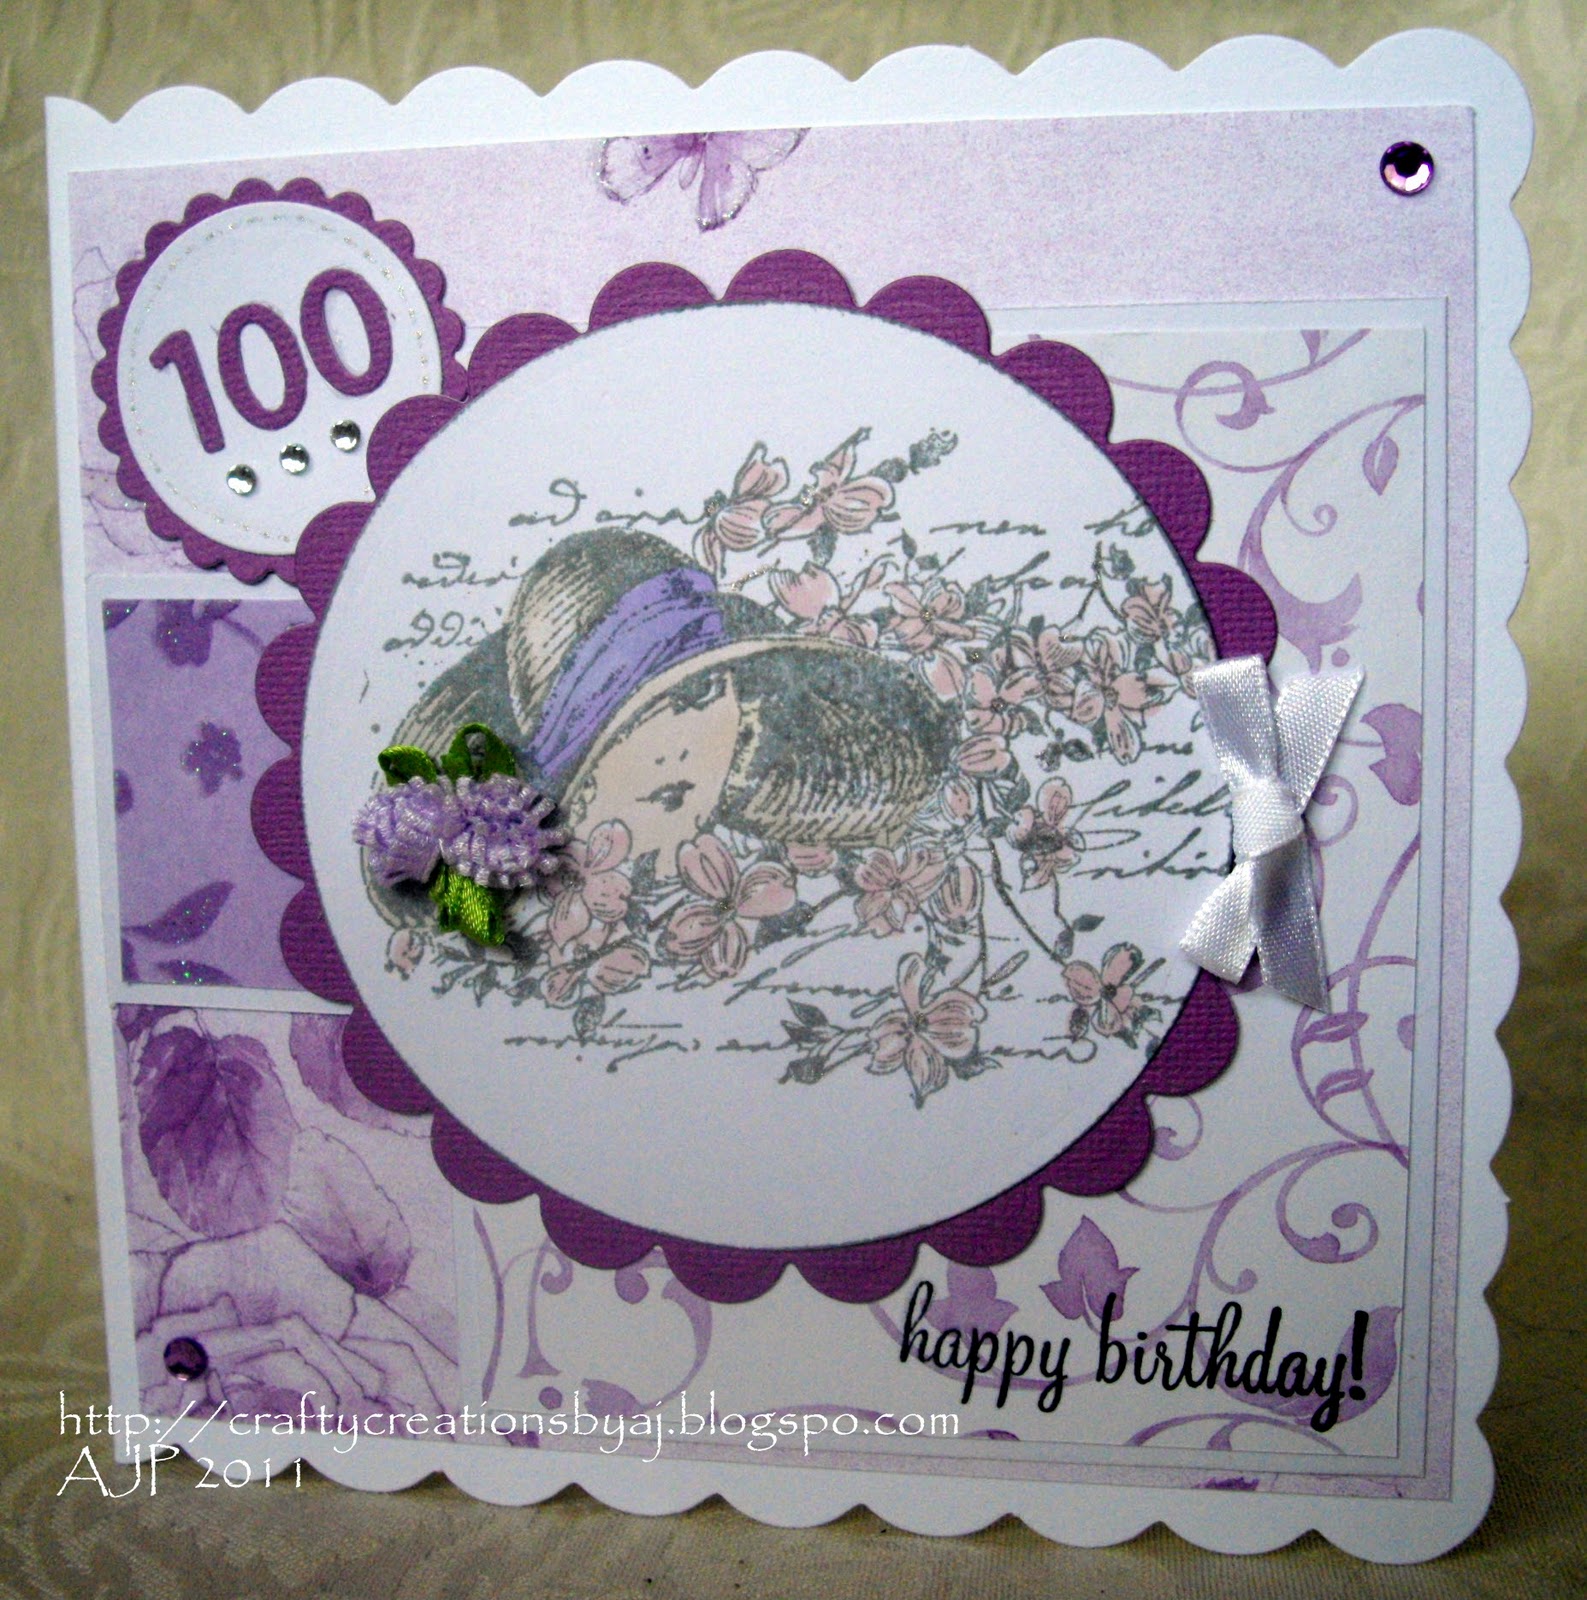 crafty-creations-by-a-j-100-years-old-birthday-card